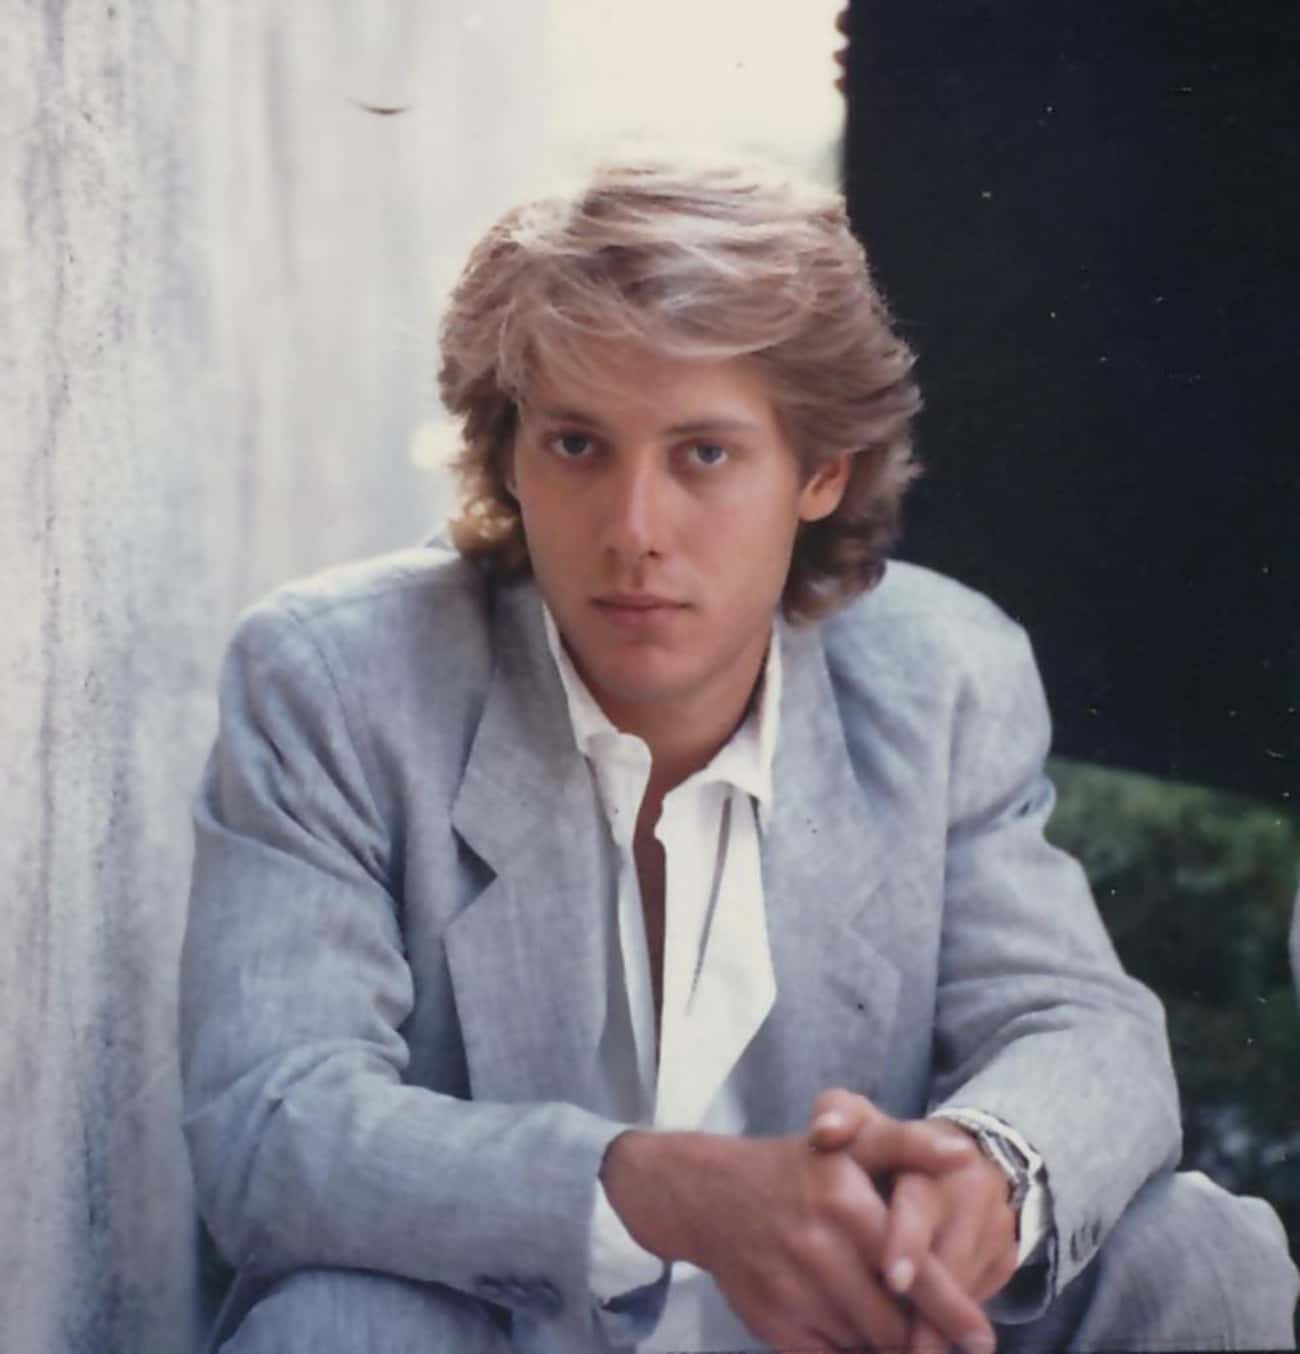 Young James Spader in Gray Suit